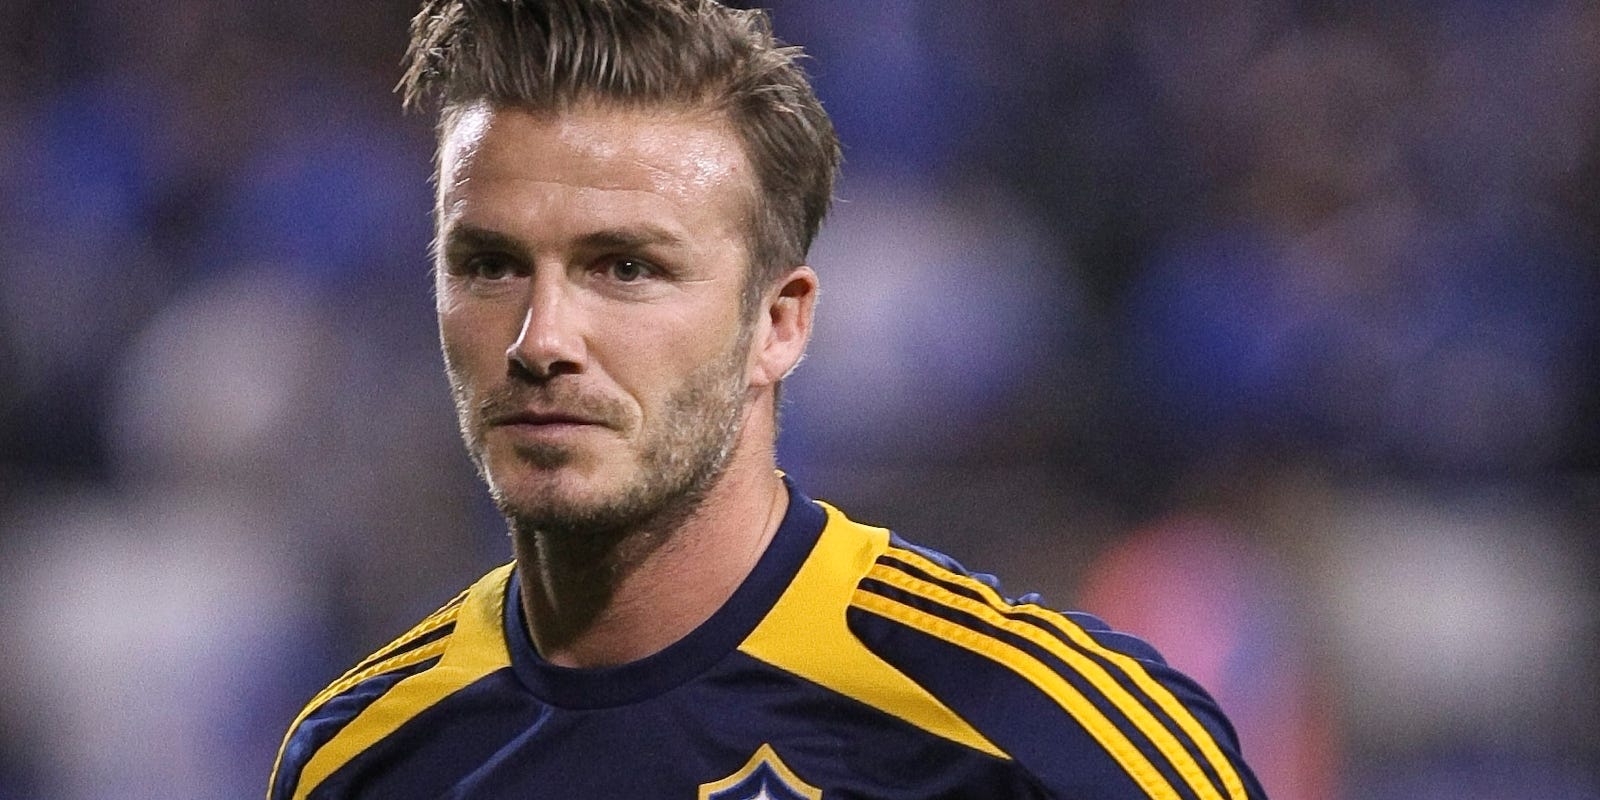 When David Beckham is ready, MLS is ready to grow